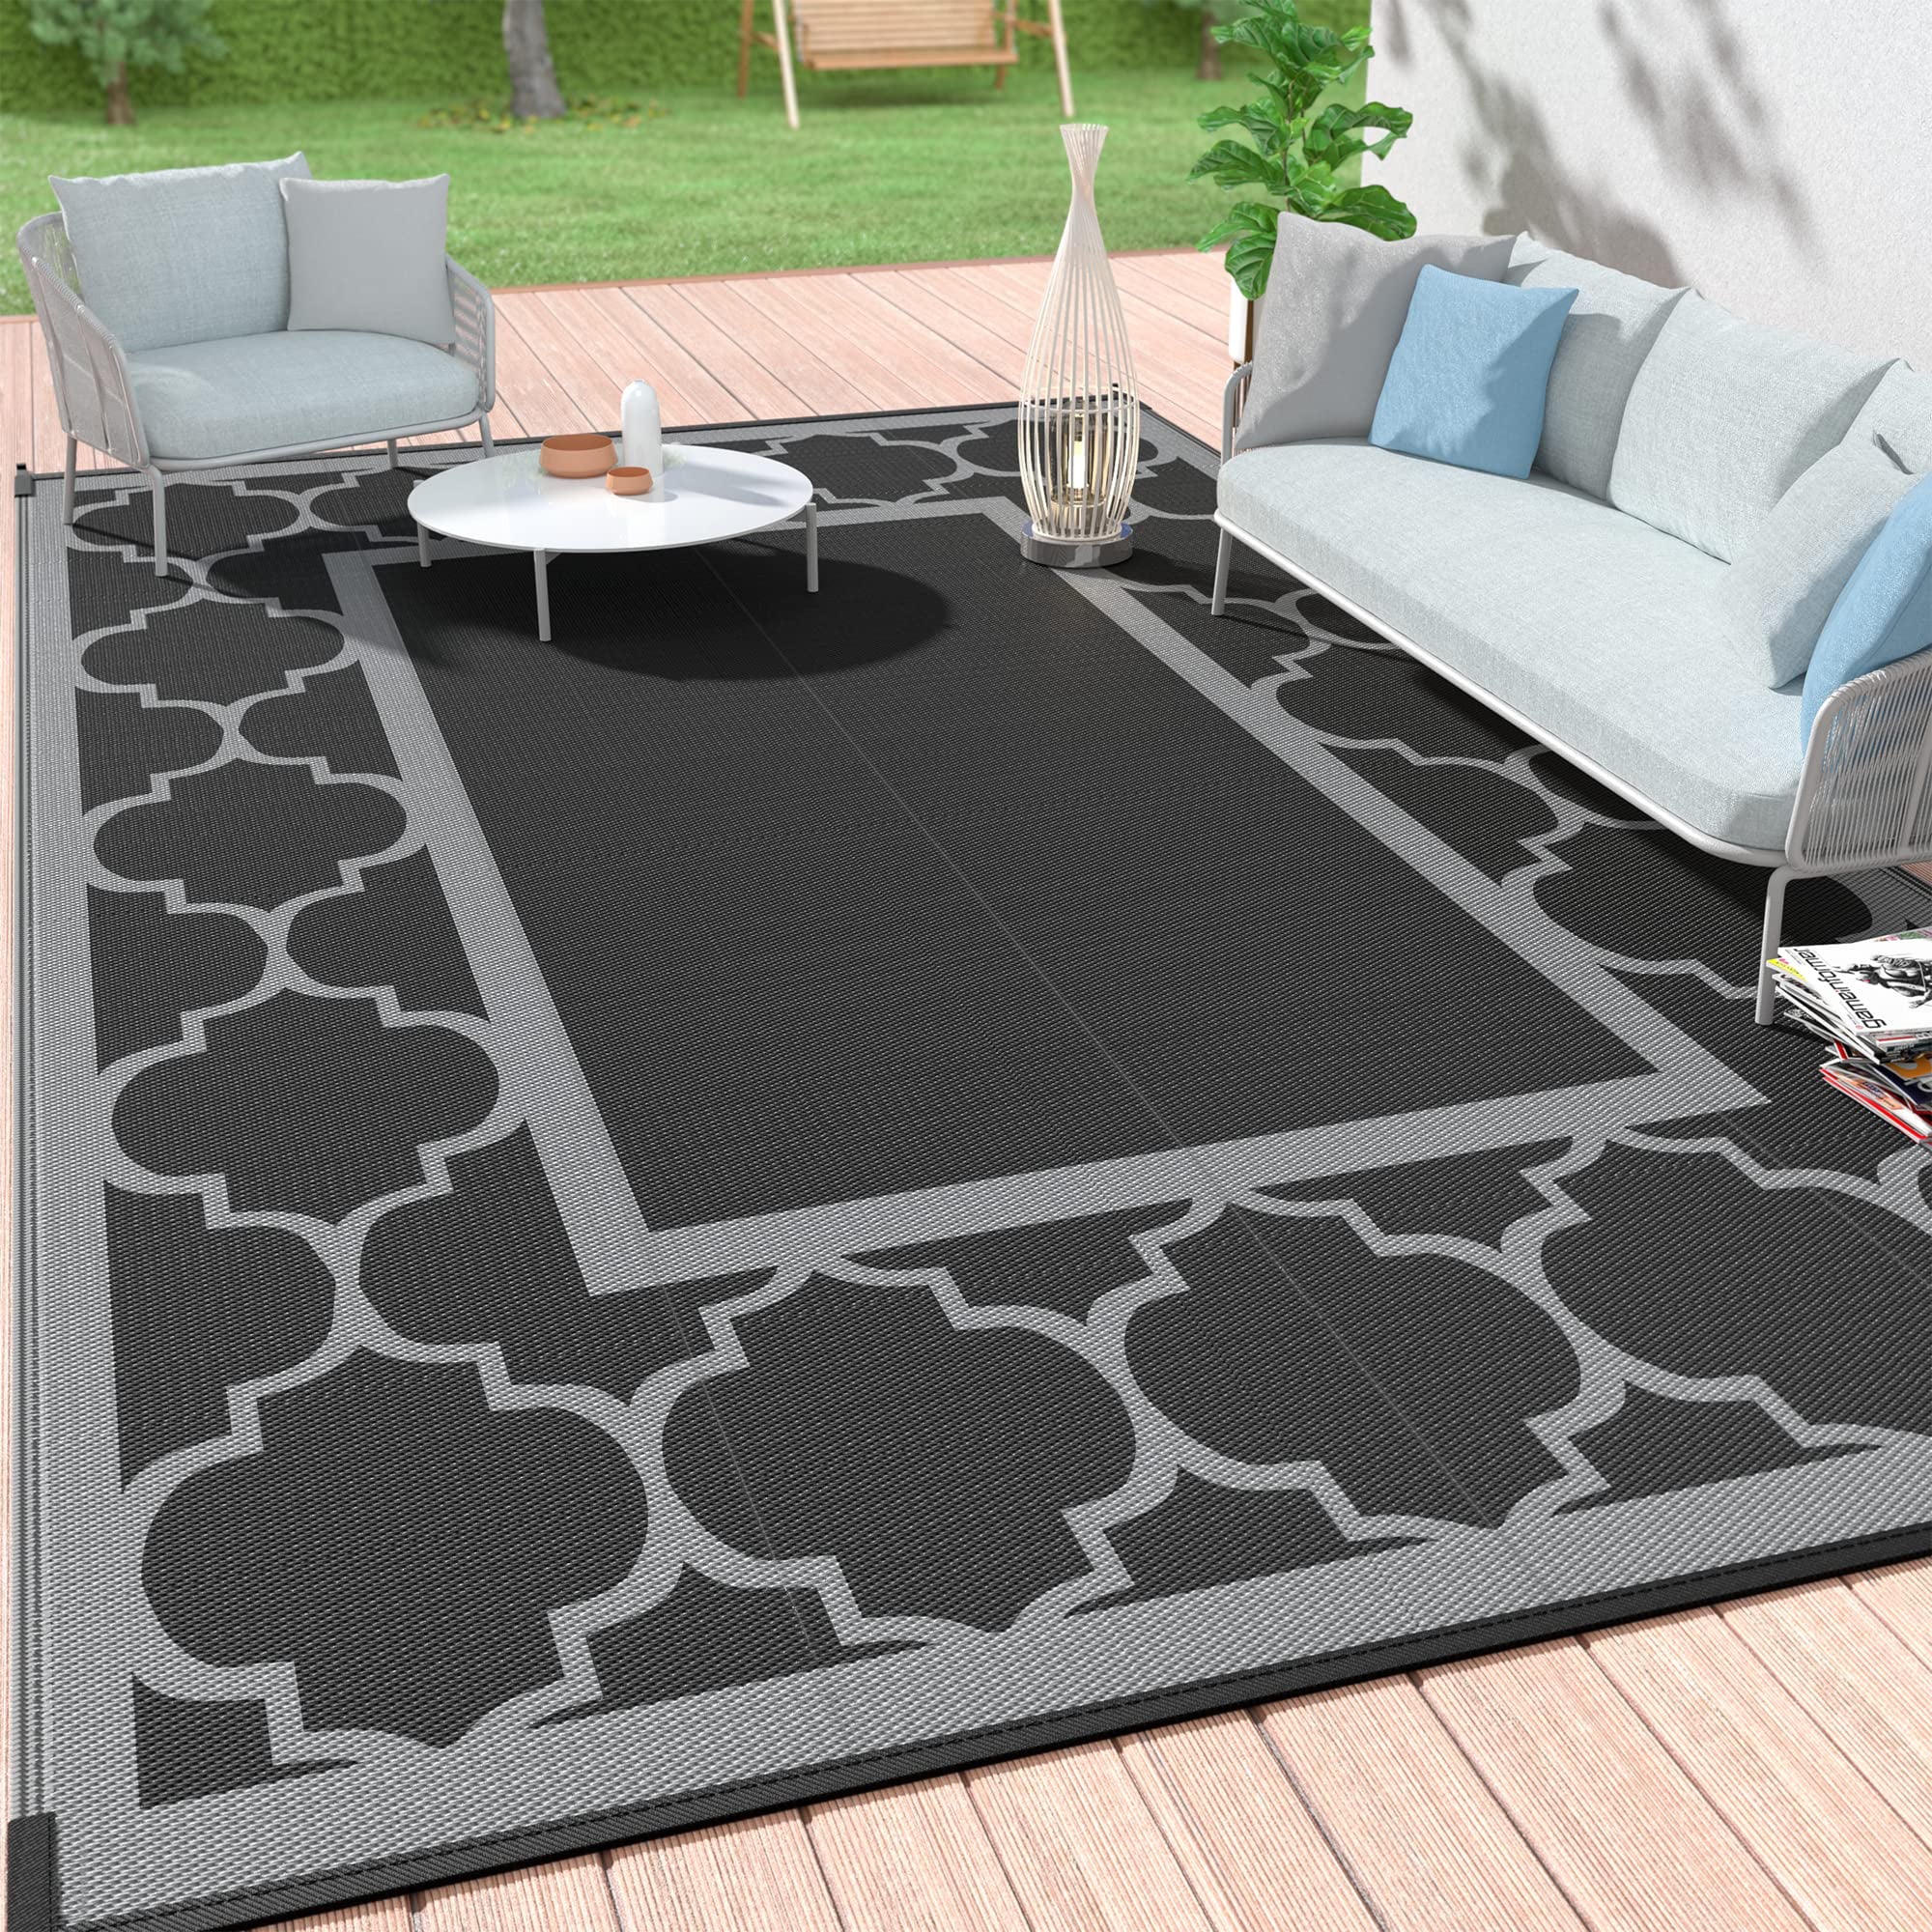  GENIMO Outdoor Rug for Patio Clearance,9'x12